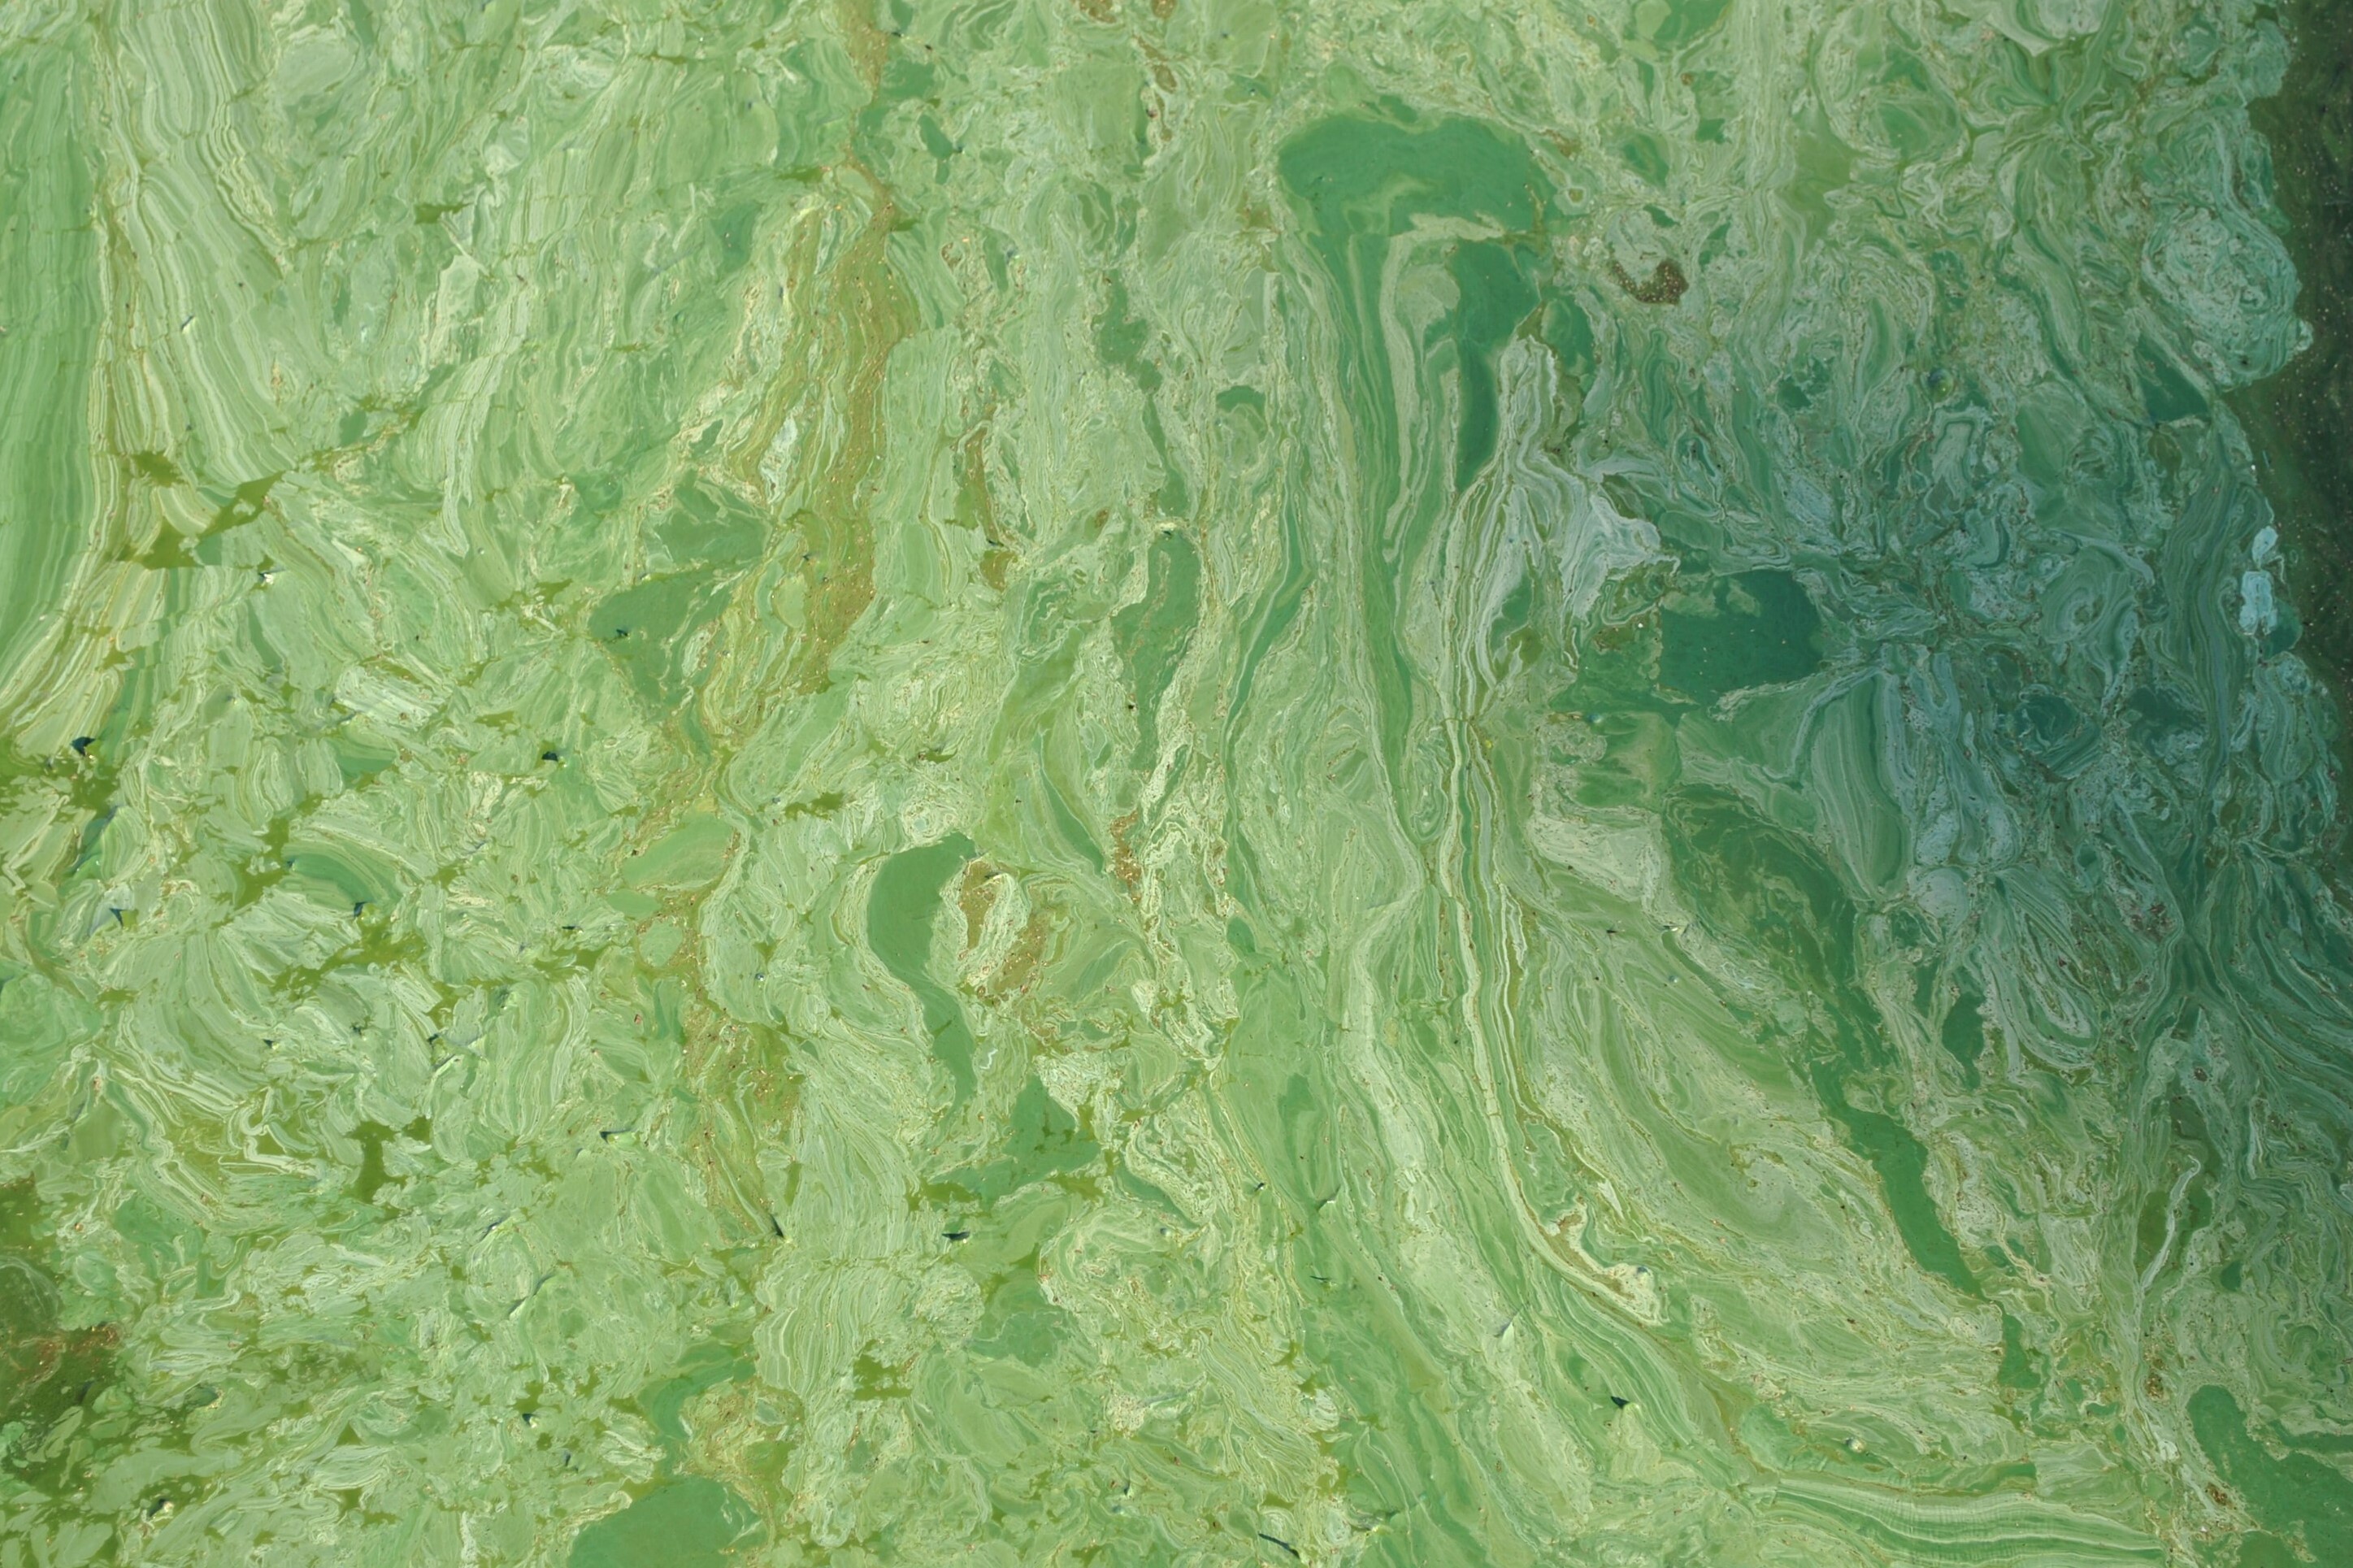 Aphanizomenon Flos-aquae. Marbled green discoloration is observed.